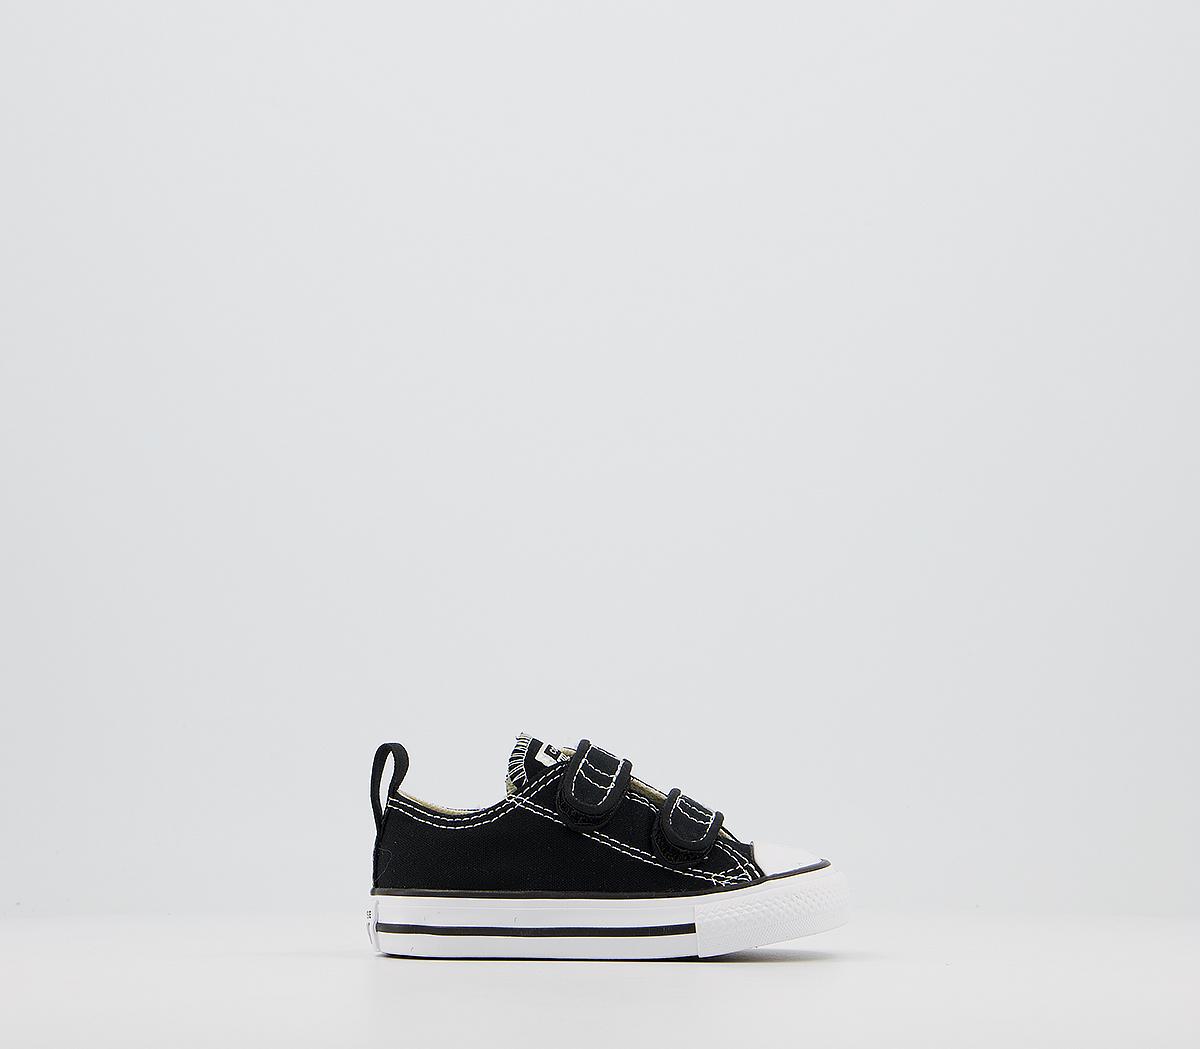 ConverseAll Star 2vlace TrainersBlack White